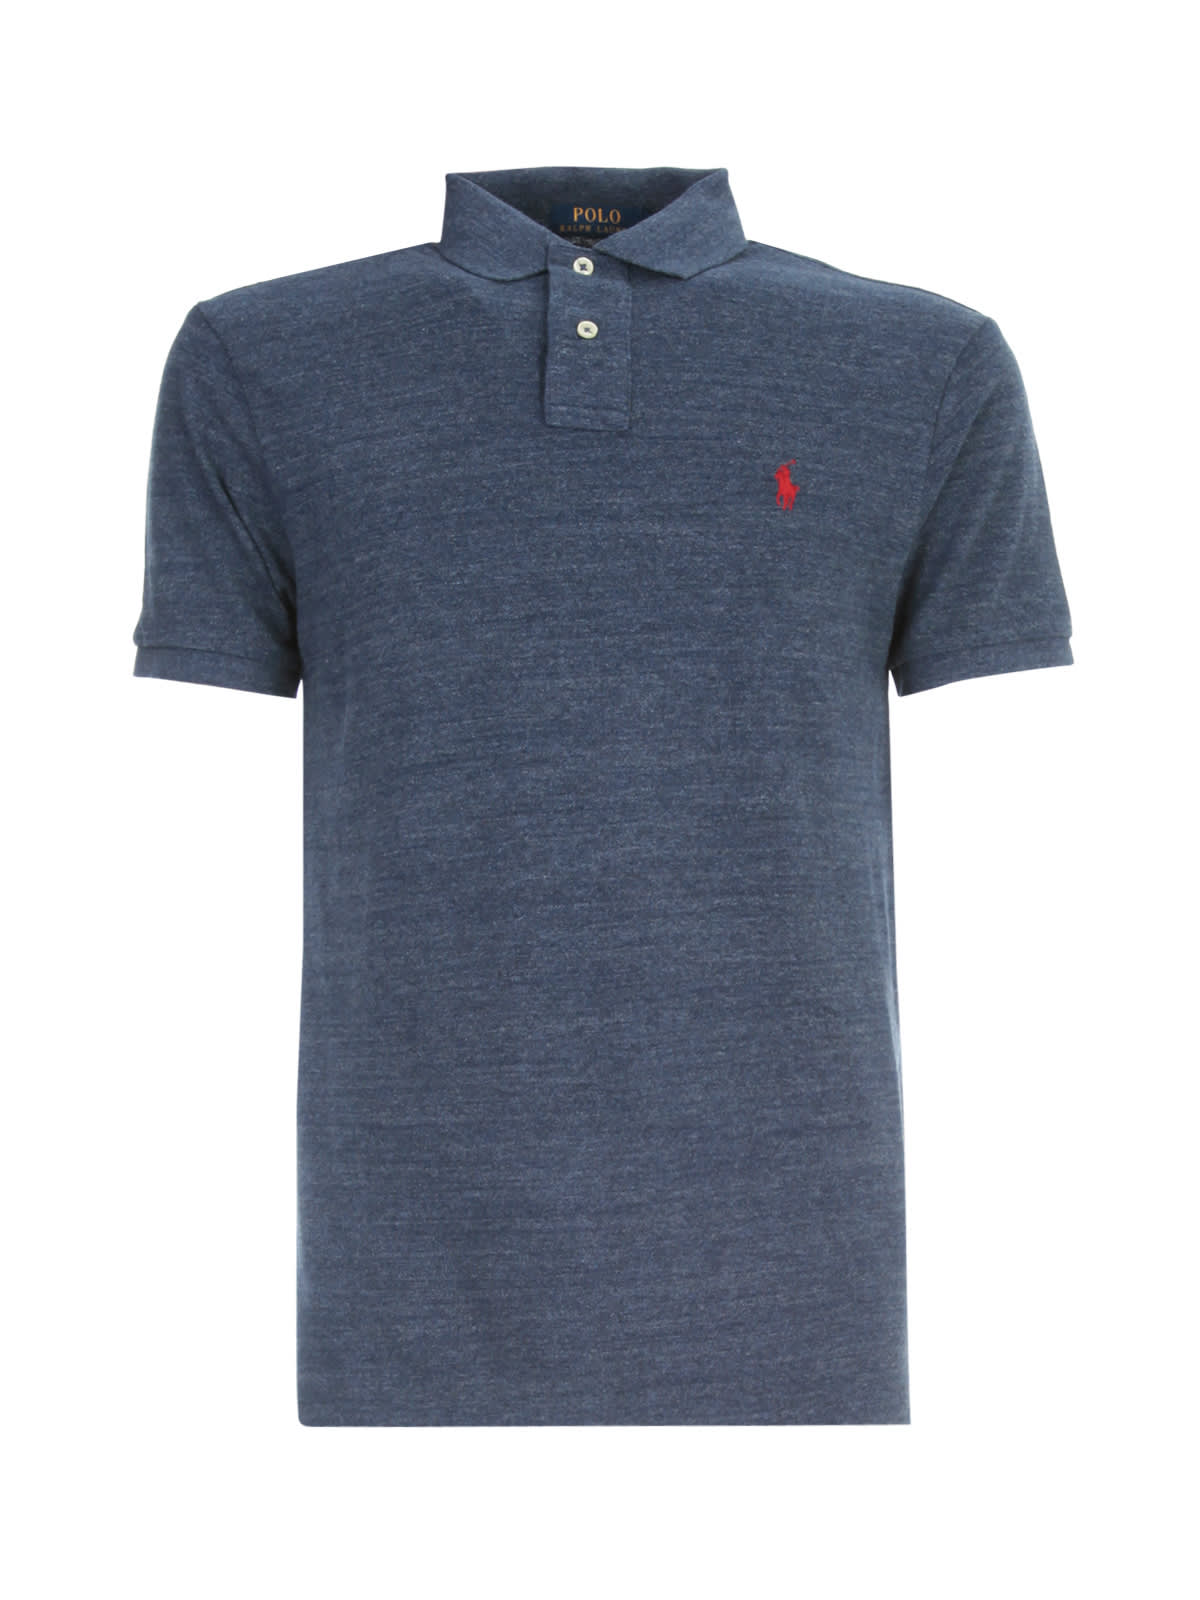 Shop Ralph Lauren Polo Shirt S/s Slim Fit Knit In Classic Royal Heather